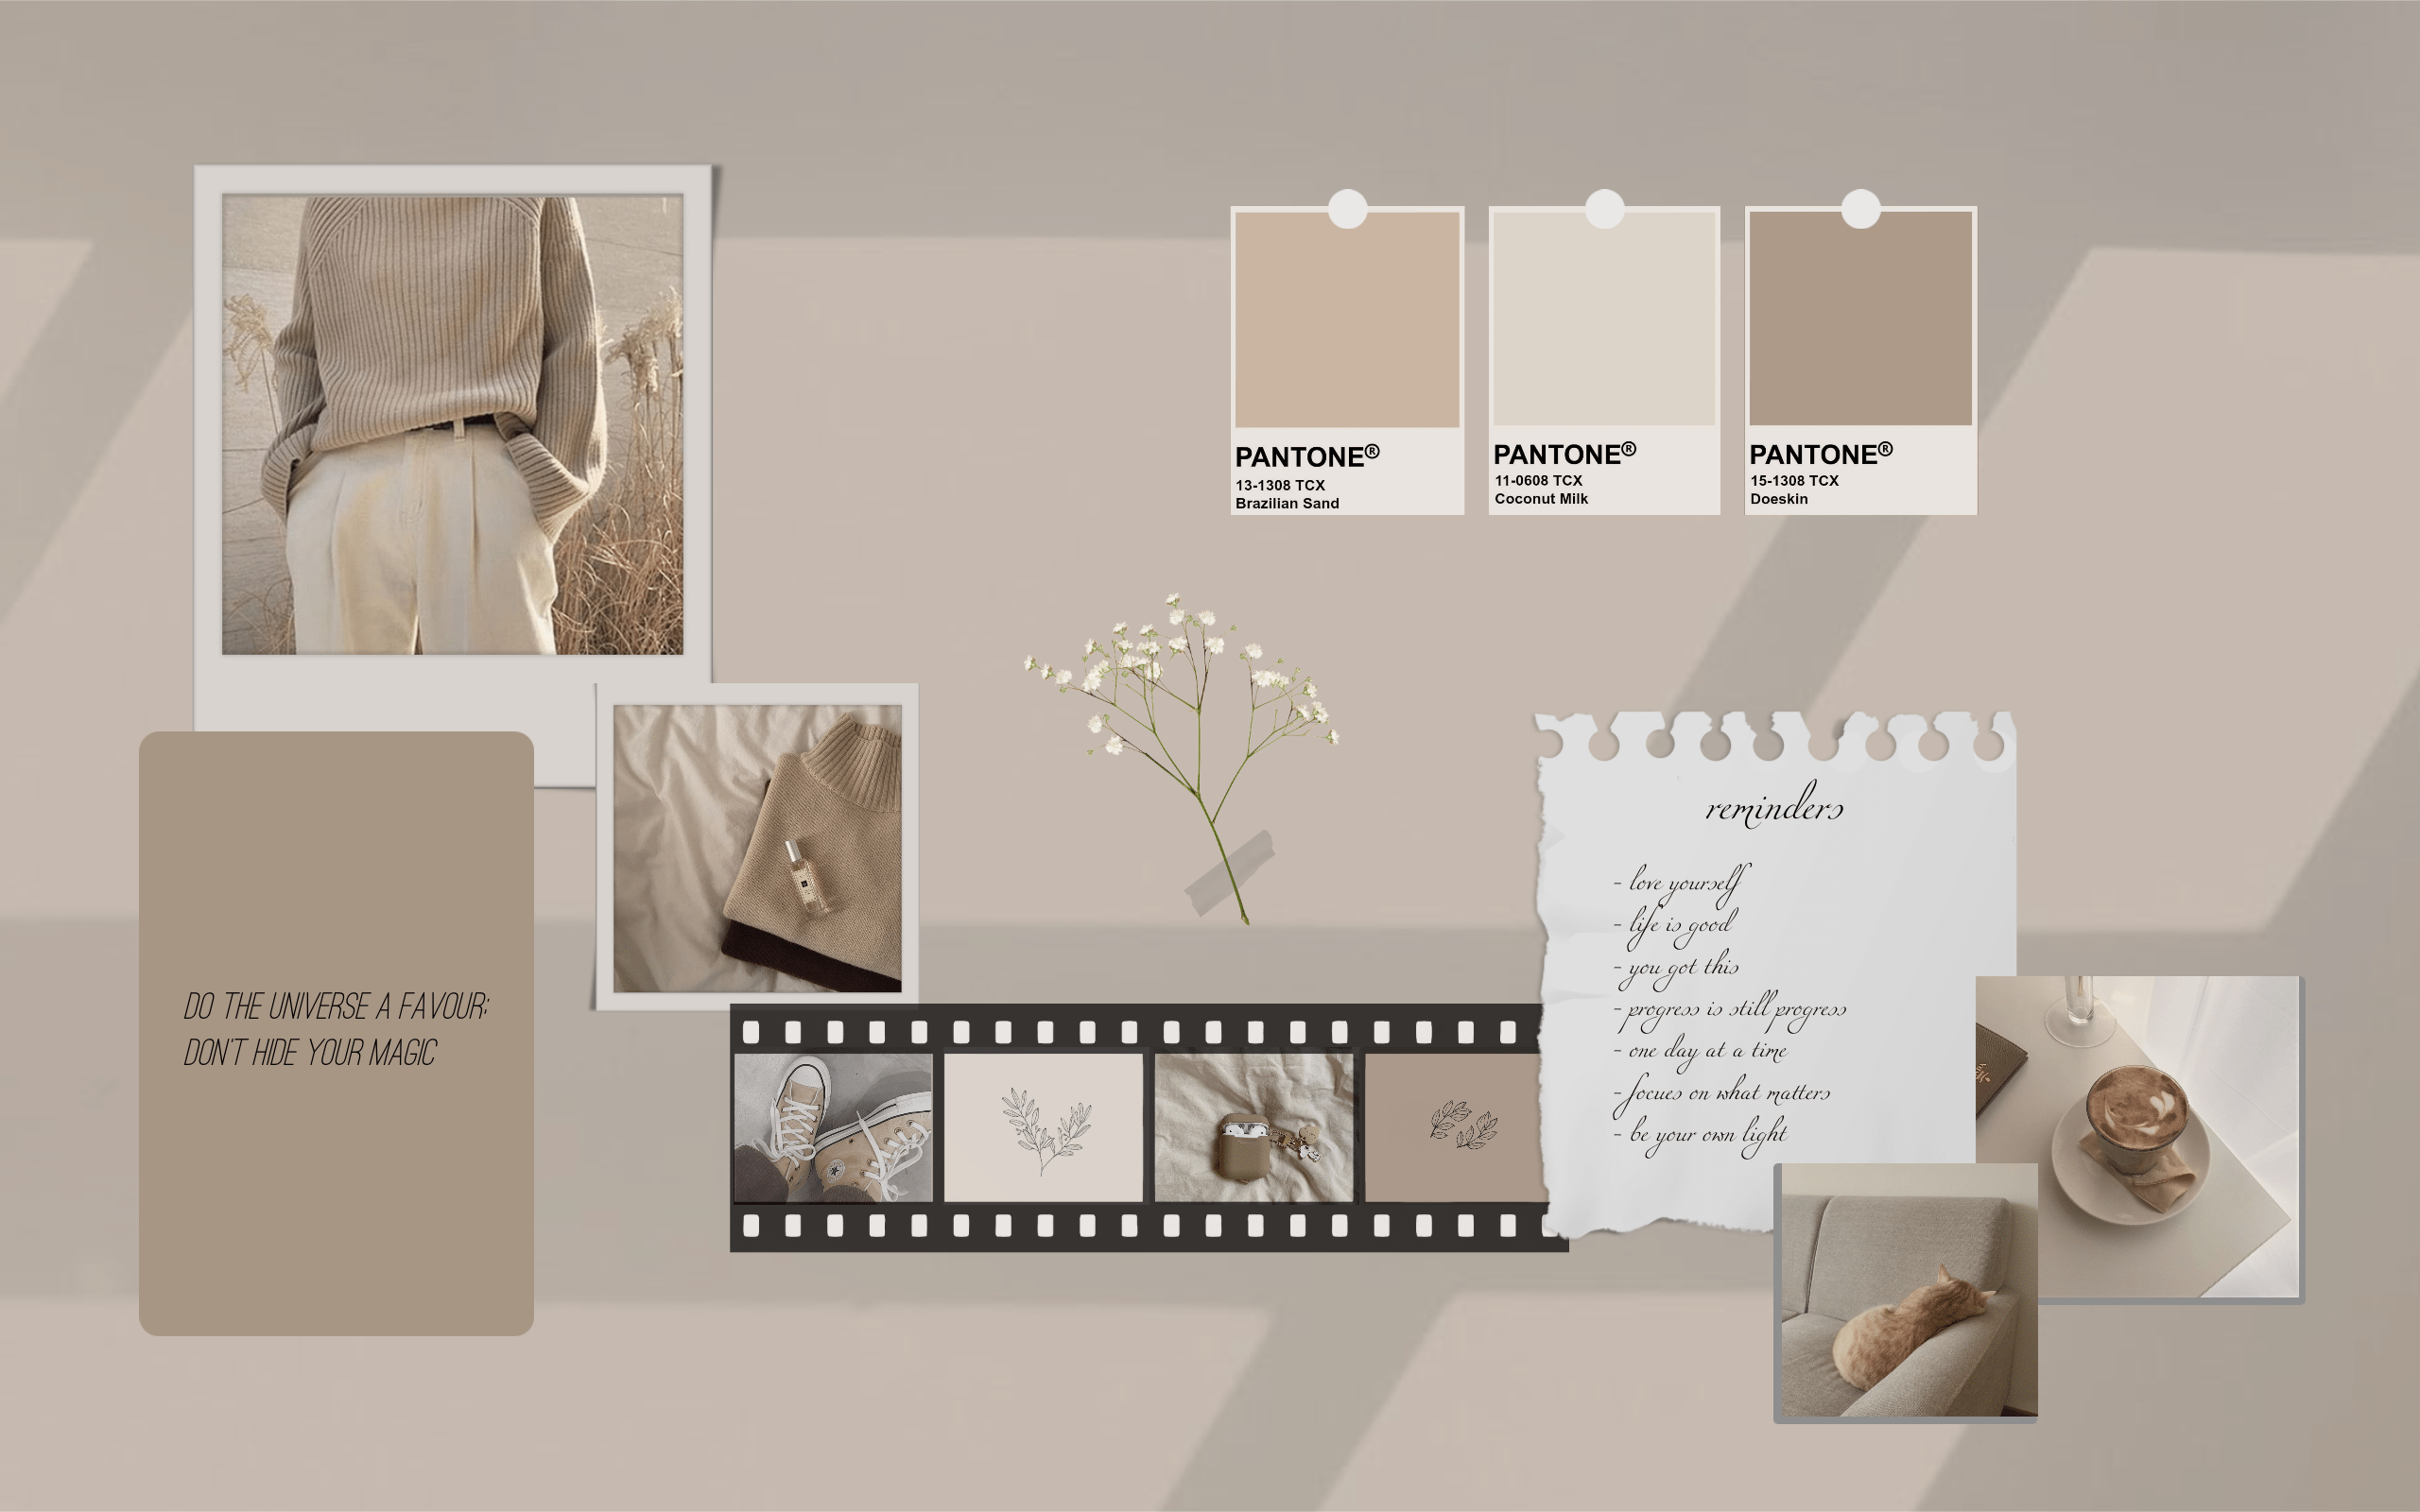 A mood board with Pantone colors and photos of neutral tones. - Beige, minimalist beige